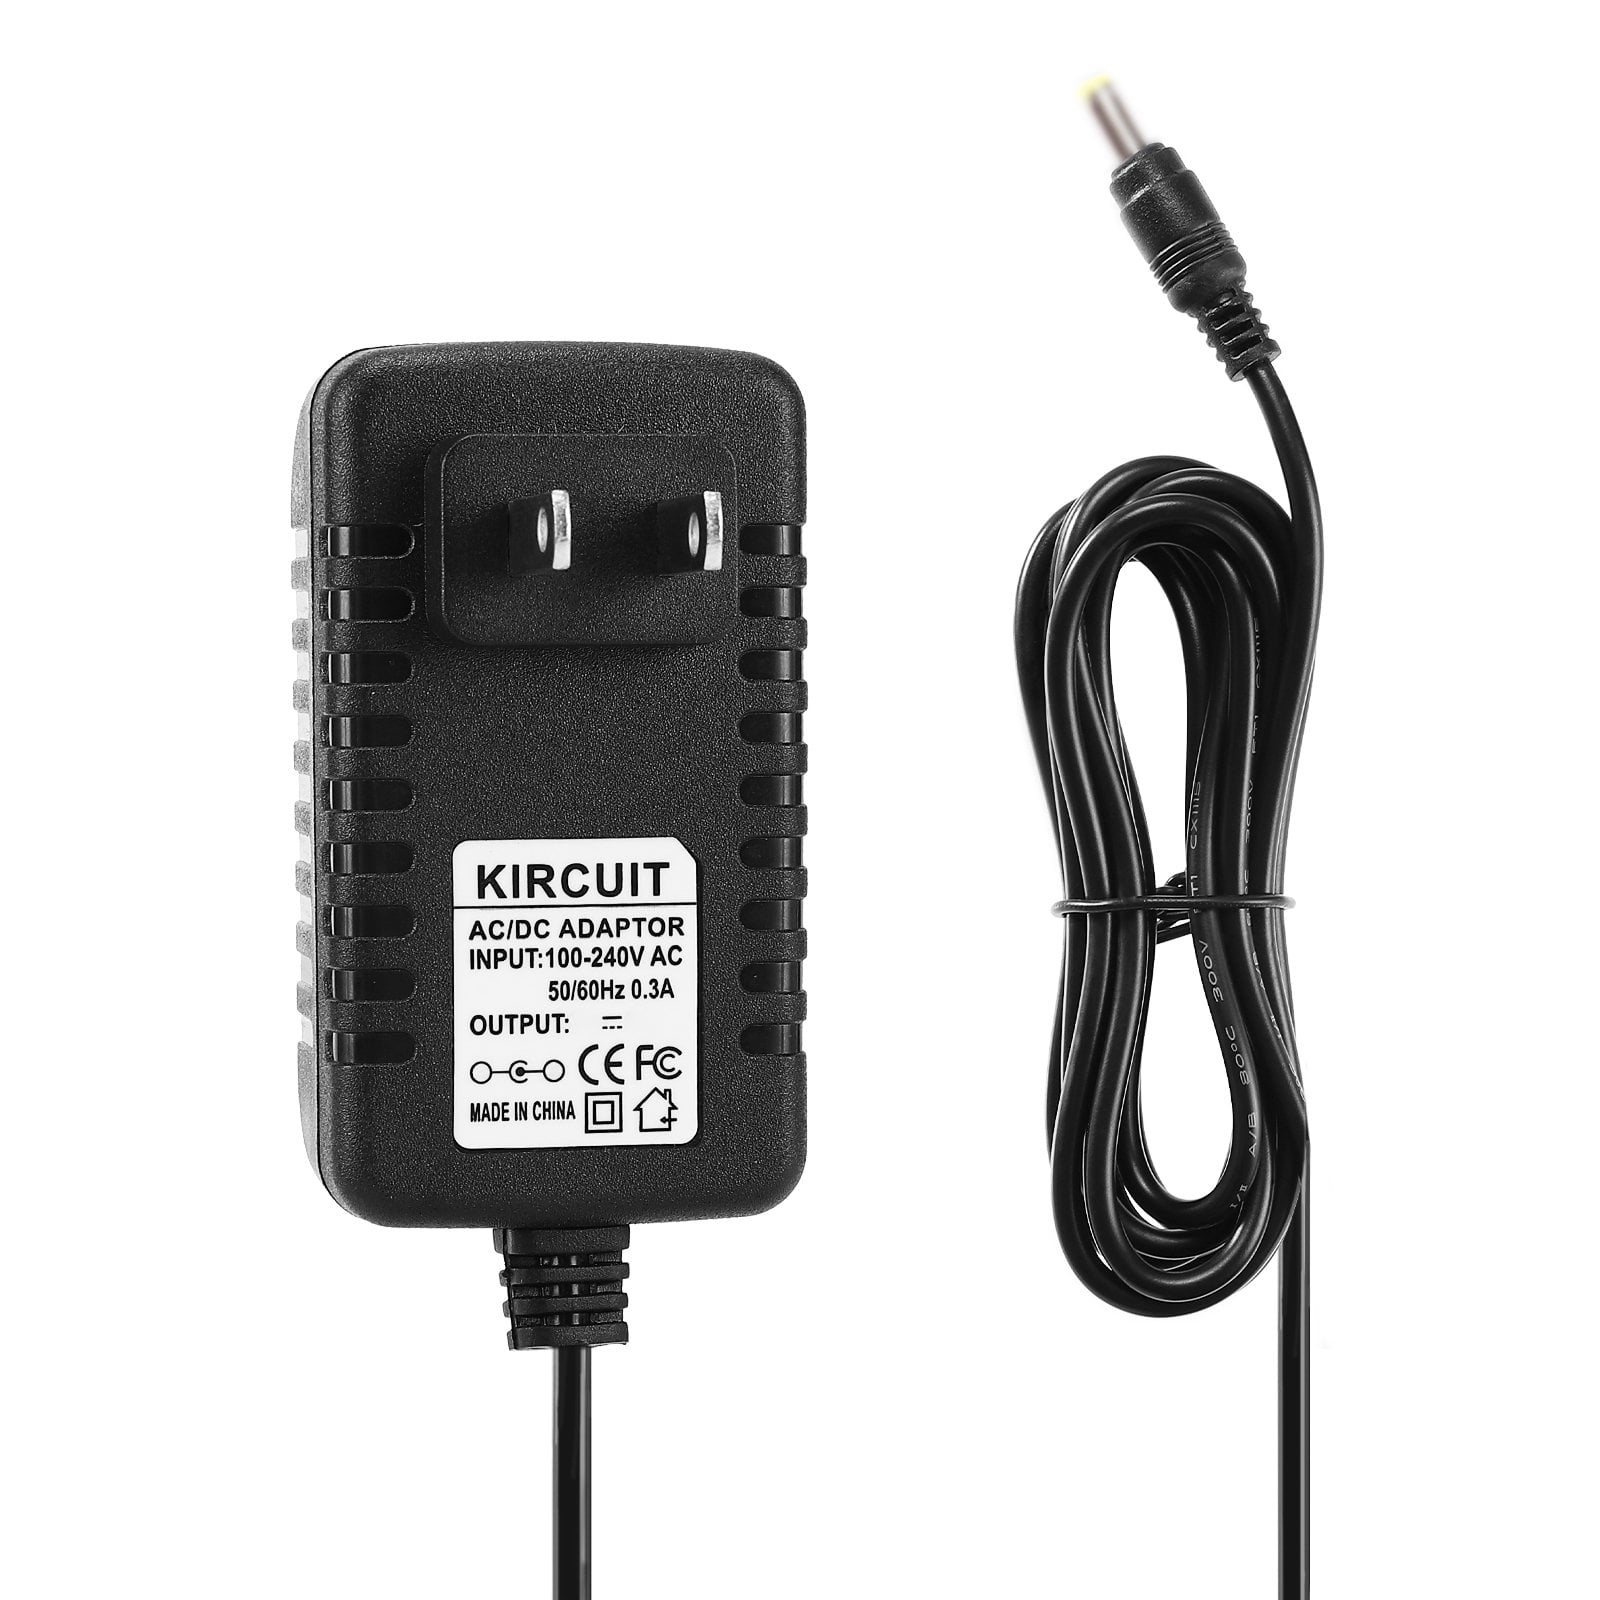 Kircuit 12.8V AC/DC Adapter Replacement for Avid Power ACD306-N